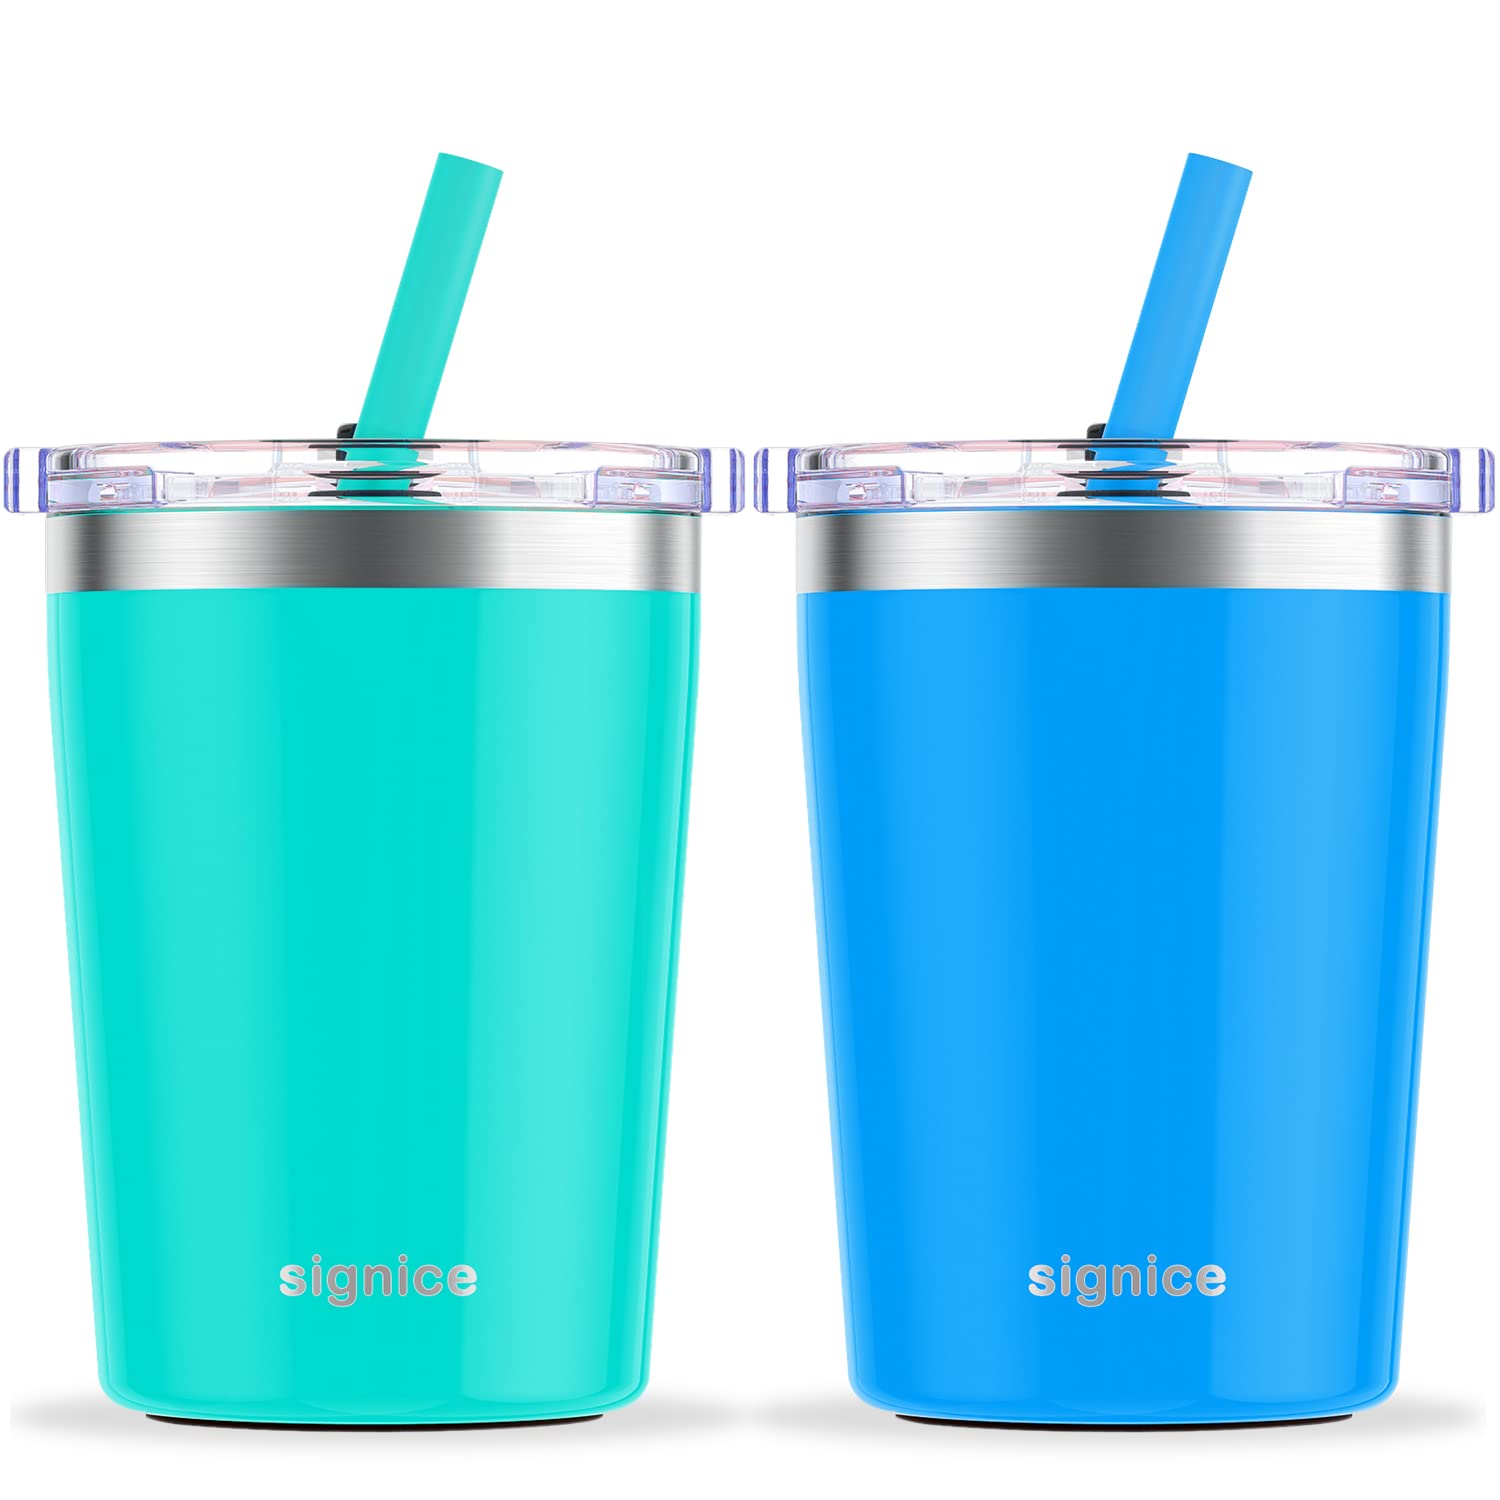 Kids Cups with Straws Spill Proof, 6 Pack 12 oz. 304 Stainless Steel  Unbreakable Reusable Water Drinking Tumblers with Lids and Sleeves,  BPA-Free